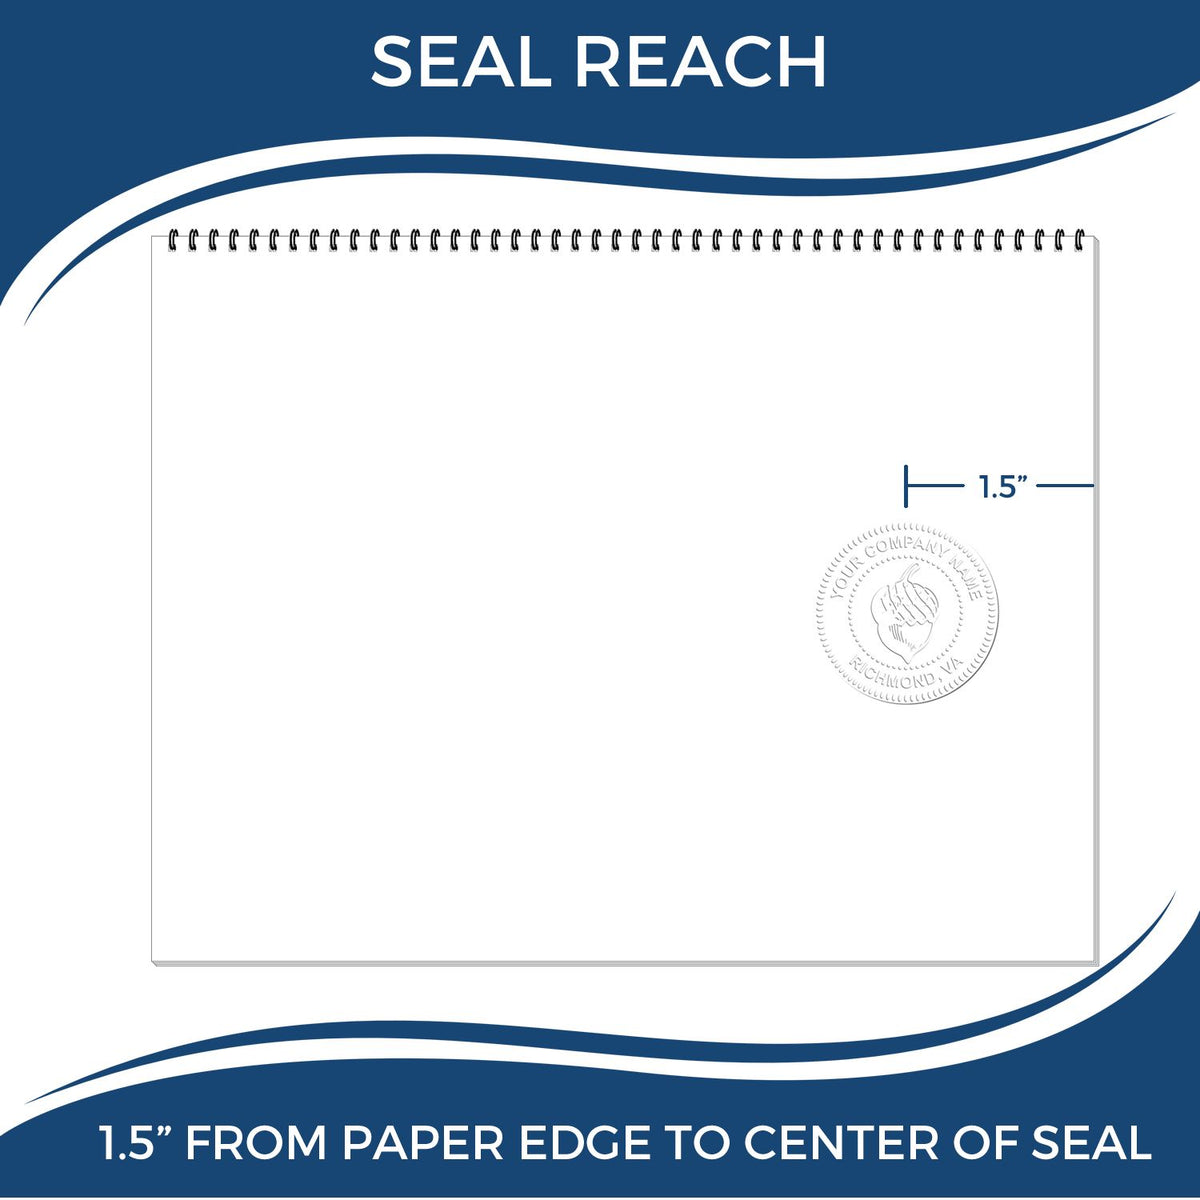 An infographic showing the seal reach which is represented by a ruler and a miniature seal image of the Handheld New Mexico Professional Engineer Embosser